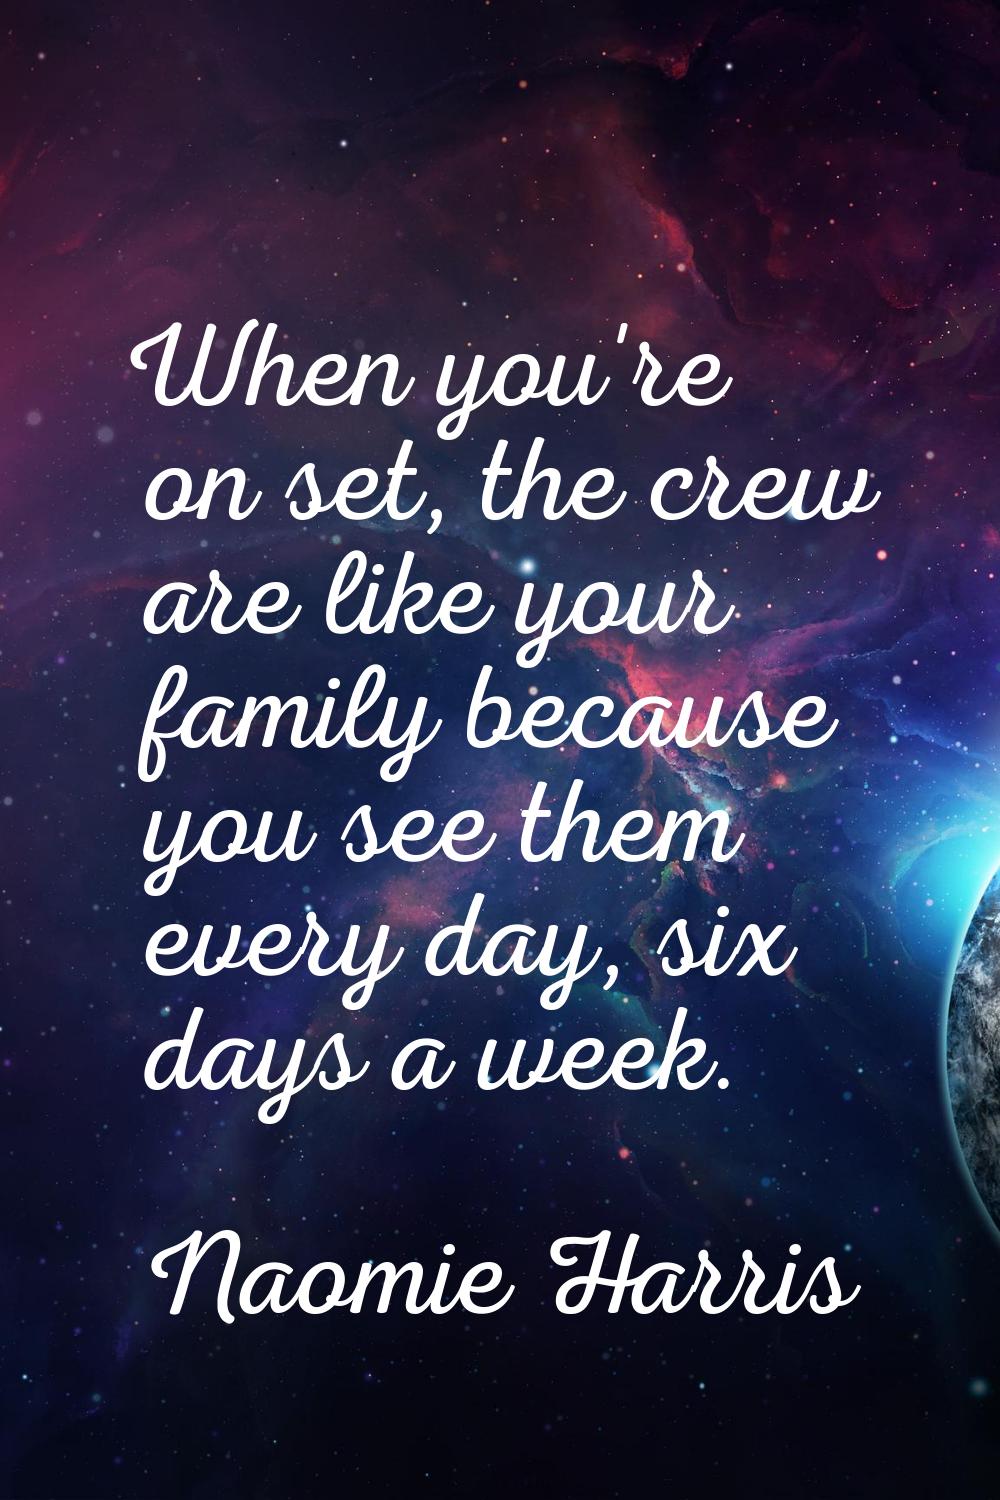 When you're on set, the crew are like your family because you see them every day, six days a week.